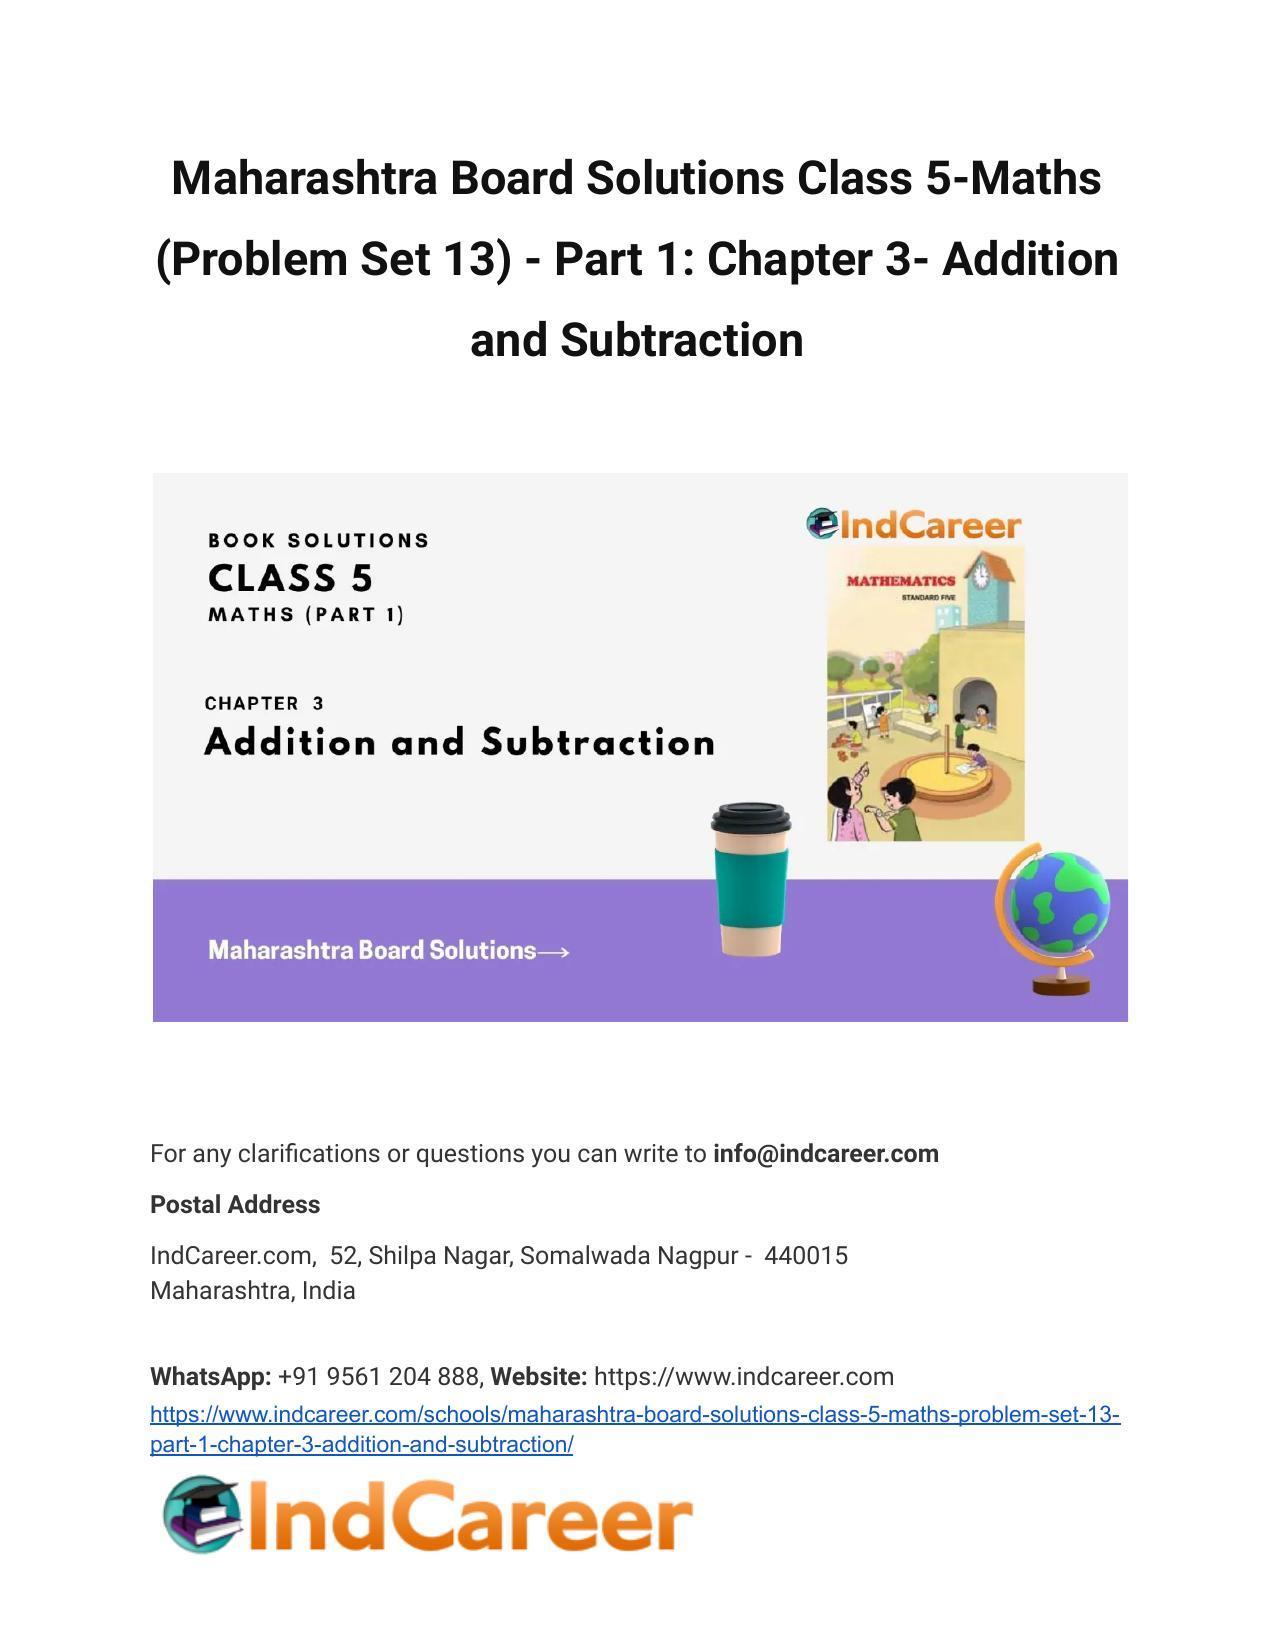 Maharashtra Board Solutions Class 5-Maths (Problem Set 13) - Part 1: Chapter 3- Addition and Subtraction - Page 1